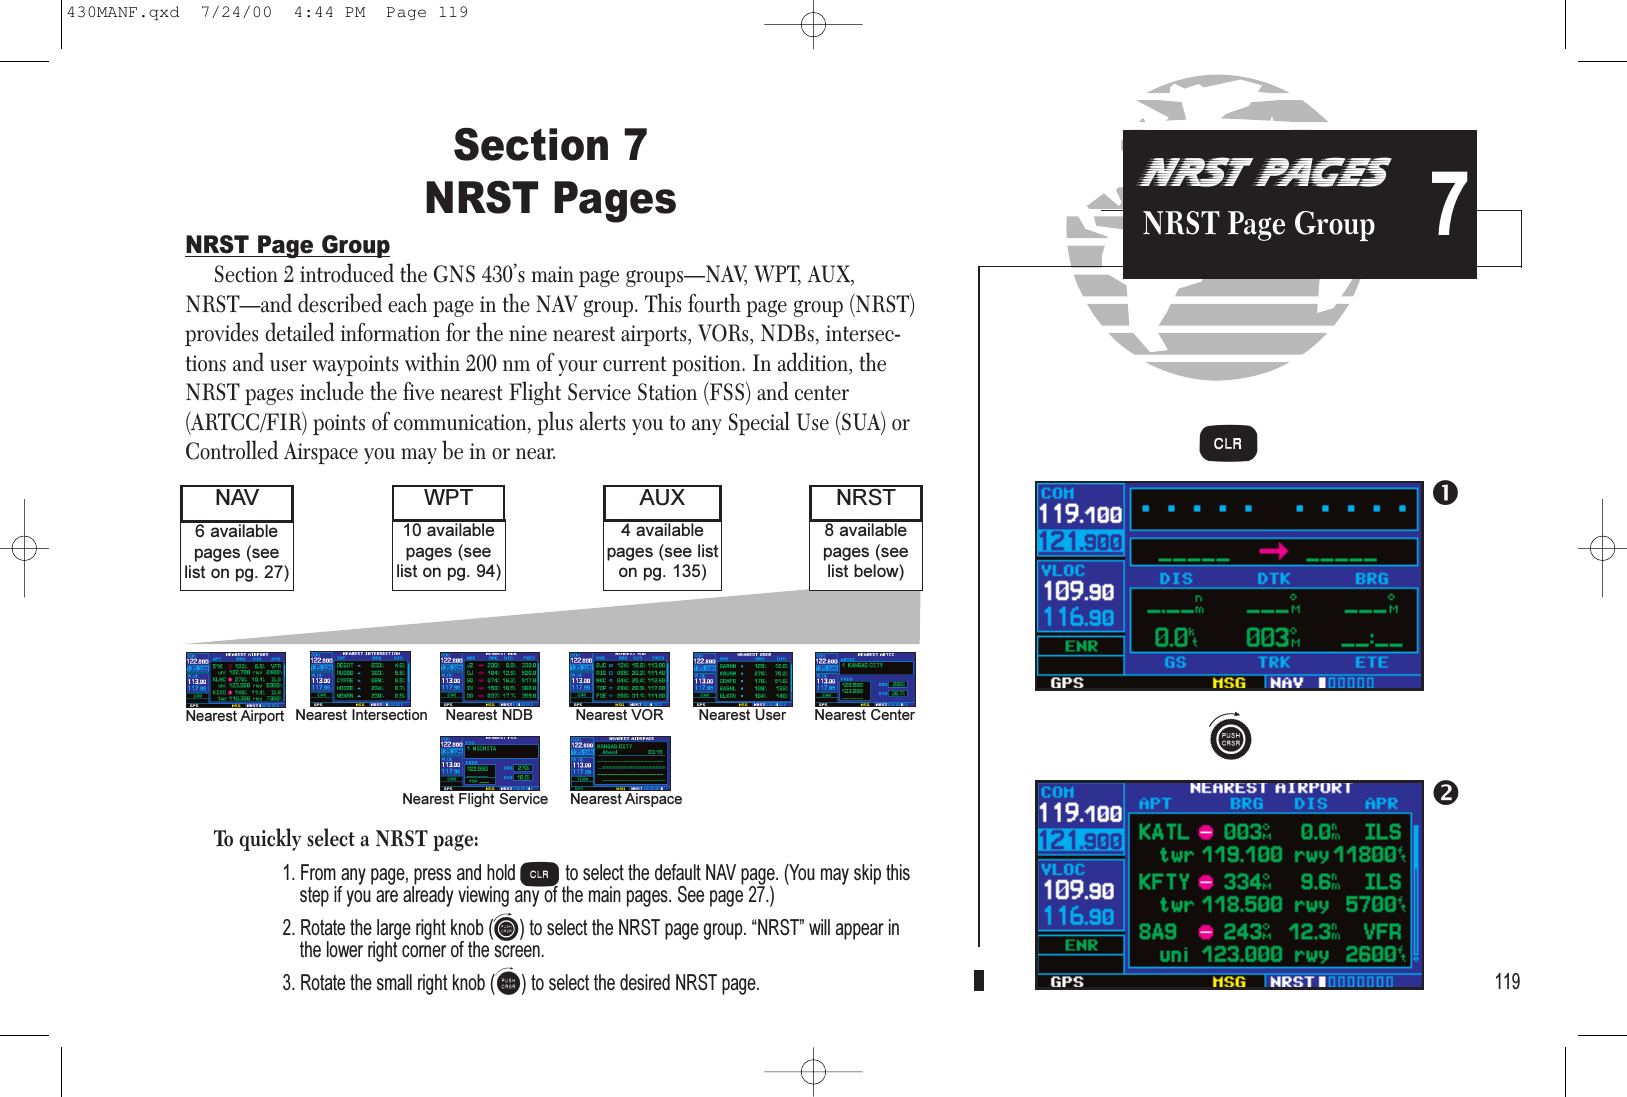 NRST PAGESNRST Page Group 7Section 7NRST PagesNRST Page GroupSection 2 introduced the GNS 430’s main page groups—NAV, WPT, AUX,NRST—and described each page in the NAV group. This fourth page group (NRST)provides detailed information for the nine nearest airports, VORs, NDBs, intersec-tions and user waypoints within 200 nm of your current position. In addition, theNRST pages include the five nearest Flight Service Station (FSS) and center(ARTCC/FIR) points of communication, plus alerts you to any Special Use (SUA) orControlled Airspace you may be in or near.To quickly select a NRST page:1. From any page, press and hold cto select the default NAV page. (You may skip thisstep if you are already viewing any of the main pages. See page 27.)2. Rotate the large right knob (d) to select the NRST page group. NRST will appear inthe lower right corner of the screen.3. Rotate the small right knob (a) to select the desired NRST page. 1198 availablepages (seelist below)6 availablepages (seelist on pg. 27)NAV NRST4 availablepages (see liston pg. 135)AUX10 availablepages (seelist on pg. 94)WPTNearest Airport Nearest Intersection Nearest NDB Nearest VOR Nearest User Nearest CenterNearest Flight Service Nearest Airspace dc430MANF.qxd  7/24/00  4:44 PM  Page 119